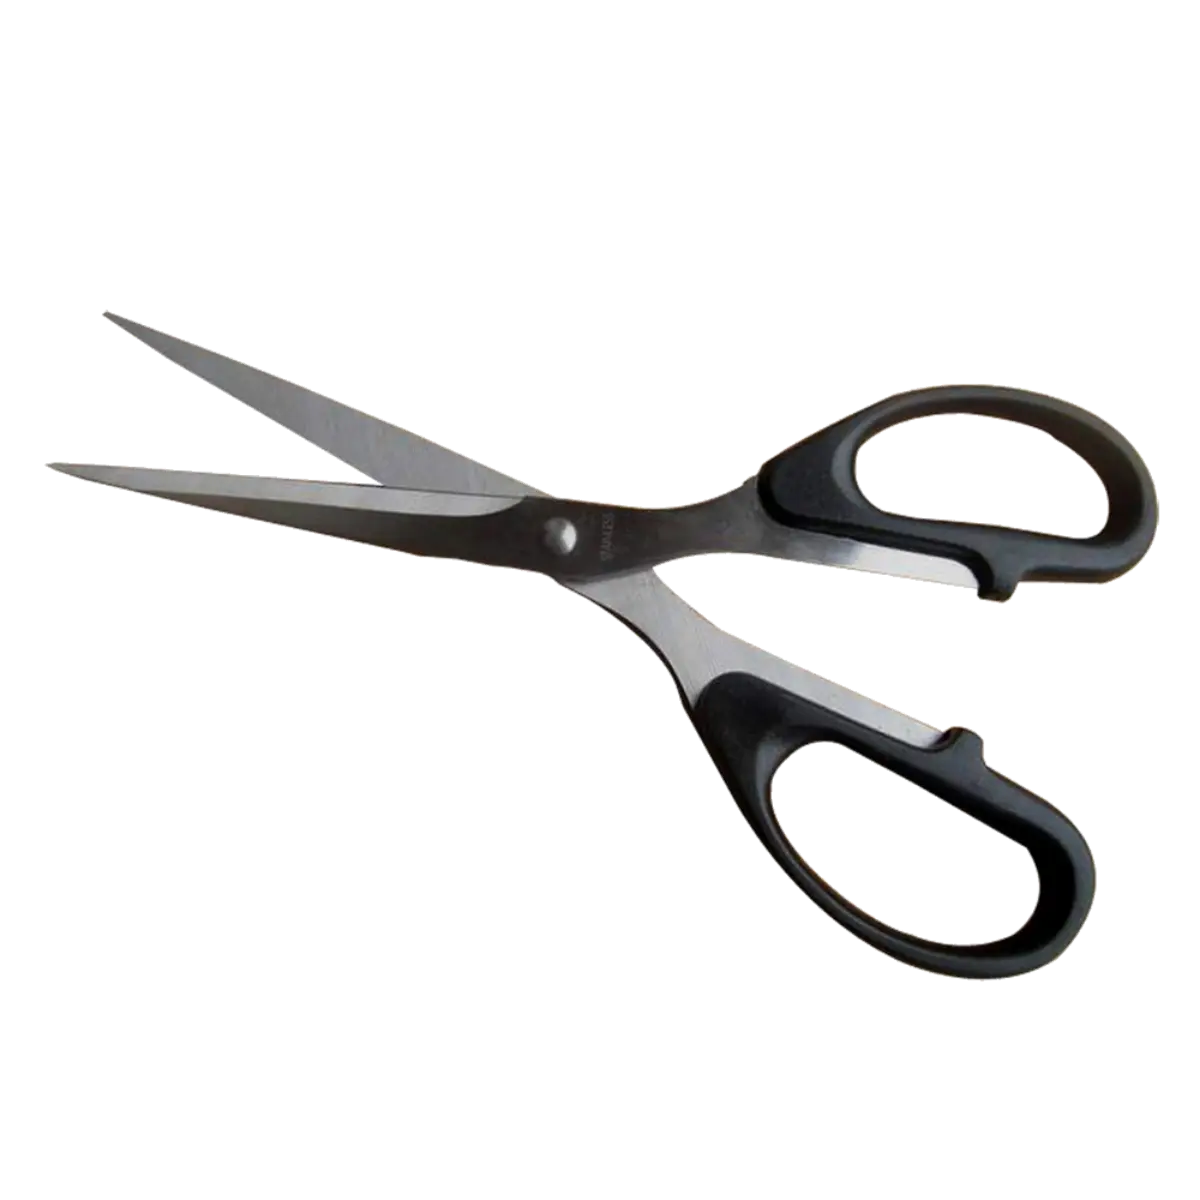 Office scissors come with stainless steel blades for sharpness and durability.